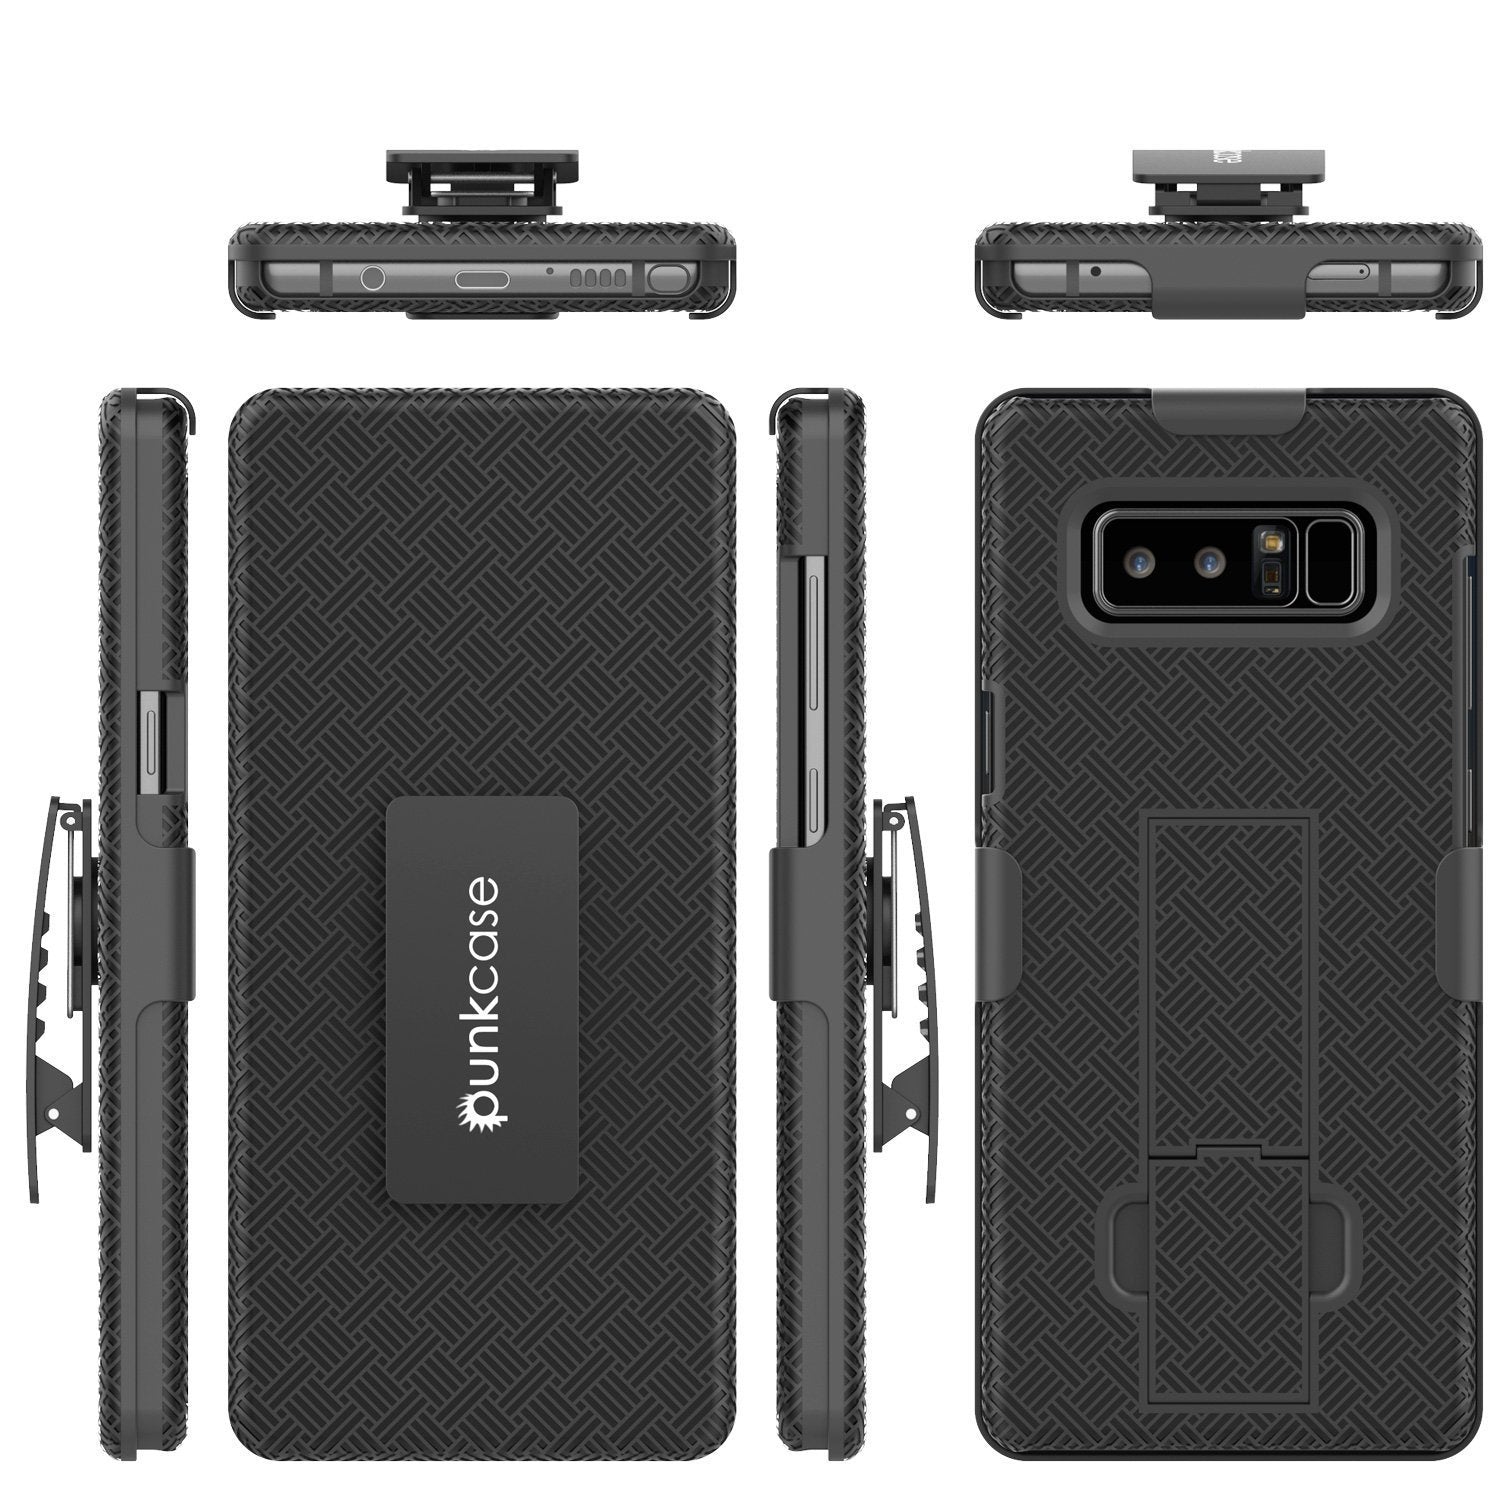 Galaxy Note 8 Case | Dual Layer Hybrid Glass Screen Protector [Black]